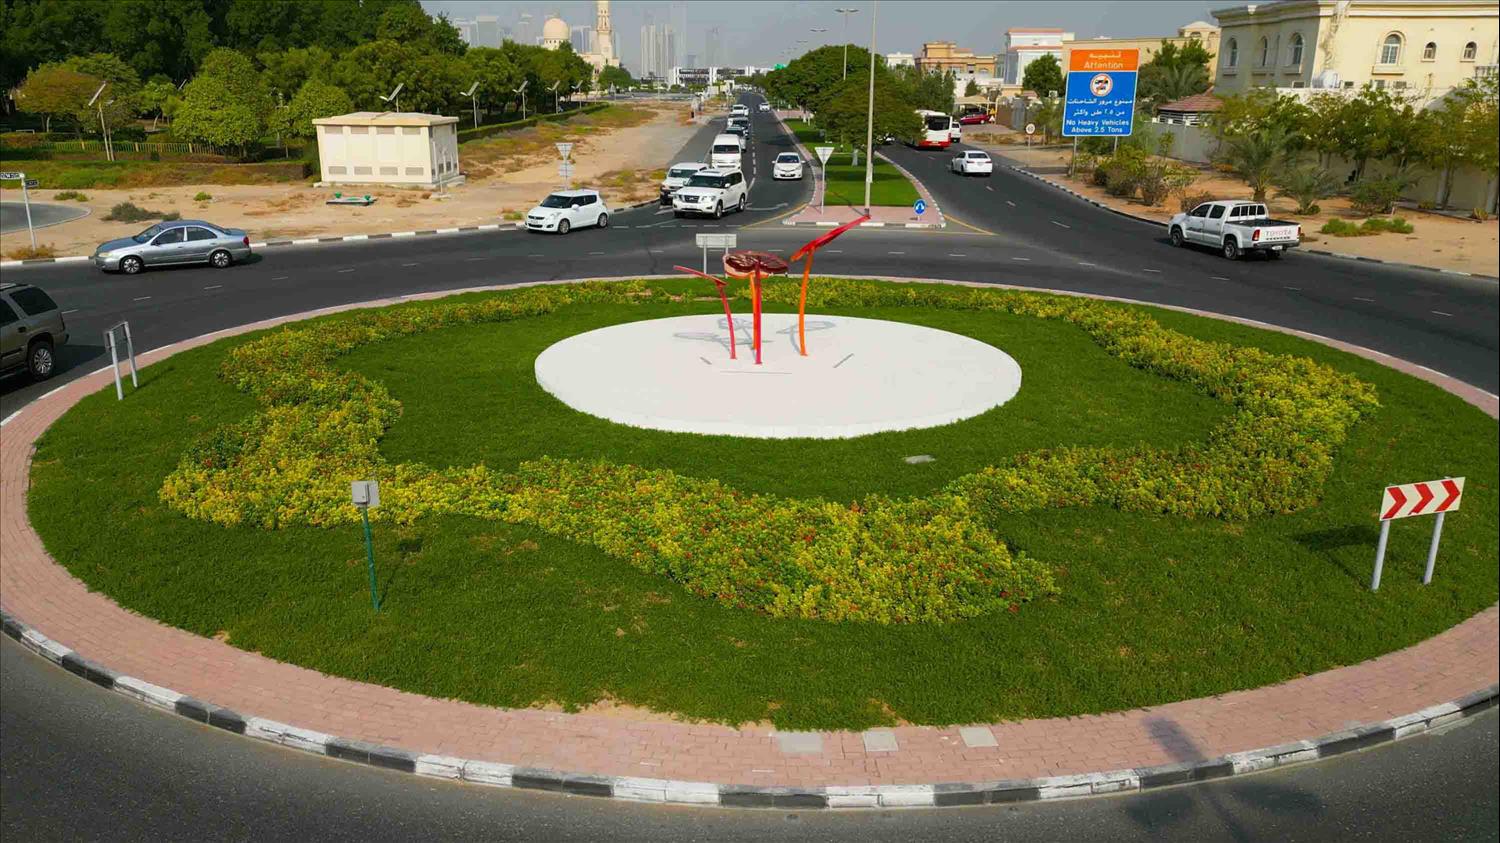 Dubai Municipality Completes Beautification Work On 4 Roundabouts With New Designs